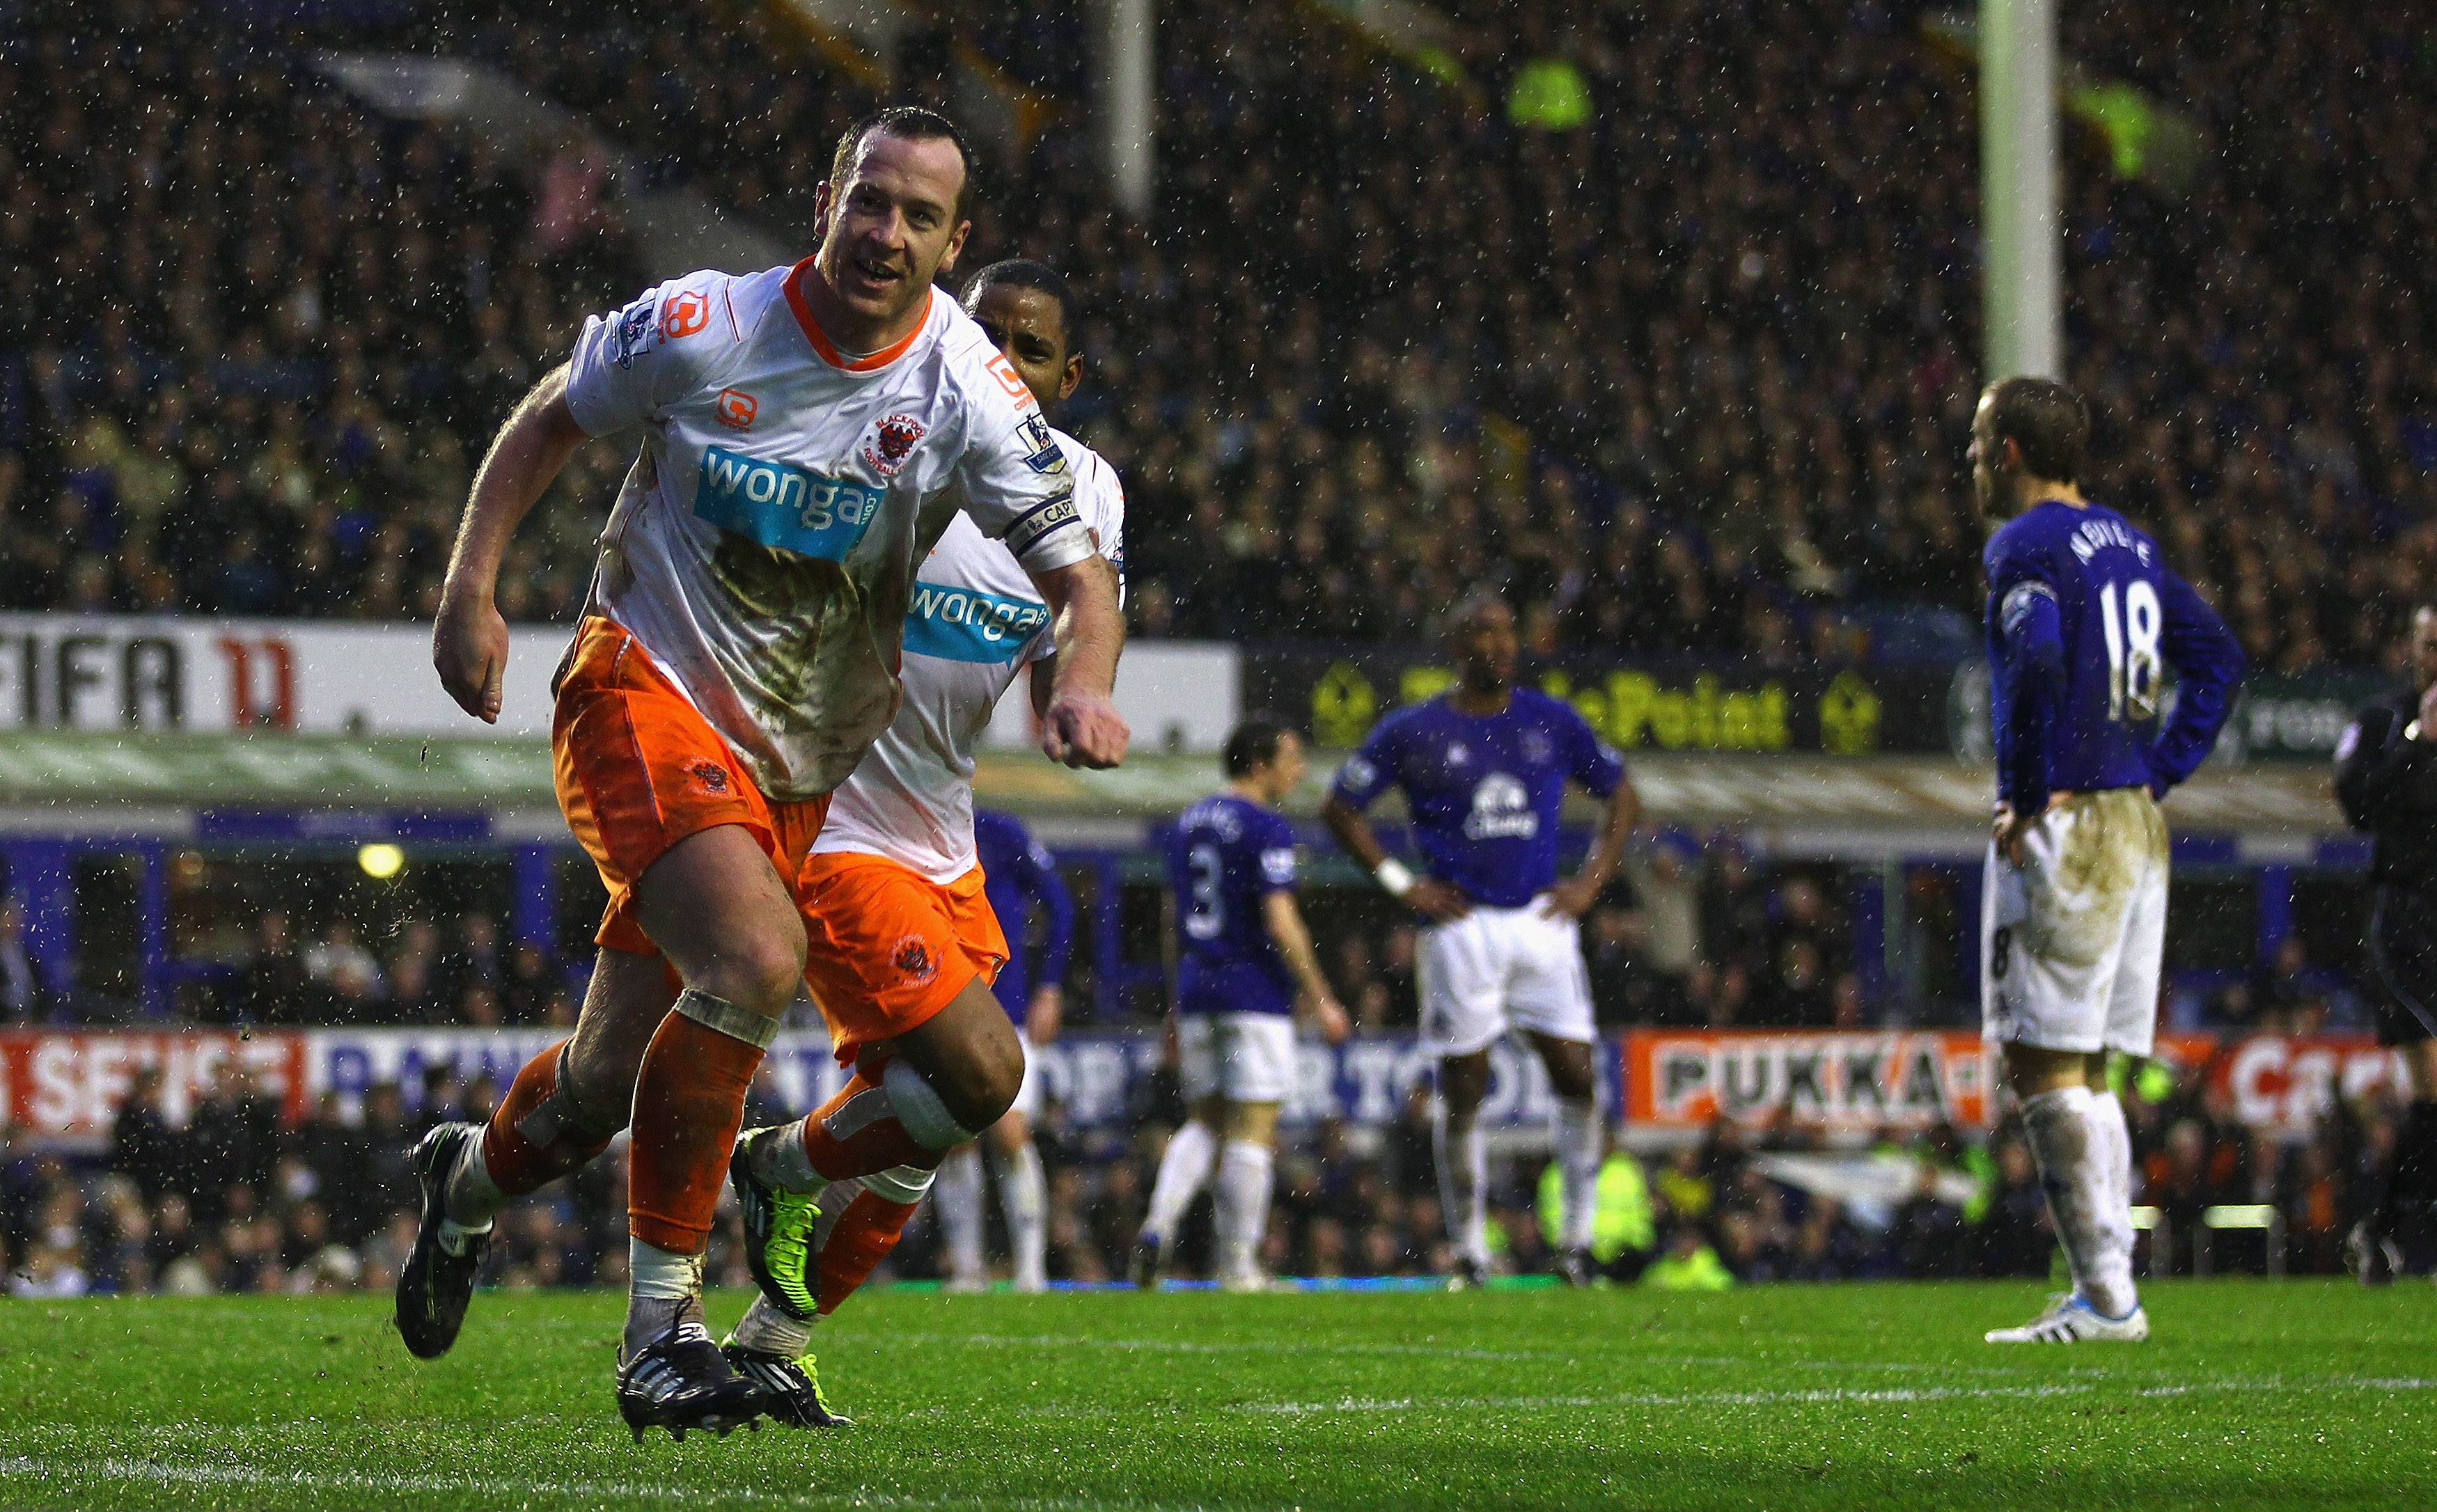 LIVERPOOL, ENGLAND - FEBRUARY 05:  Charlie Adam of Blackpool celebrates after scoring his teams third goal during the Barclays Premier League match between Everton and Blackpool at Goodison Park on February 5, 2011 in Liverpool, England.  (Photo by Clive